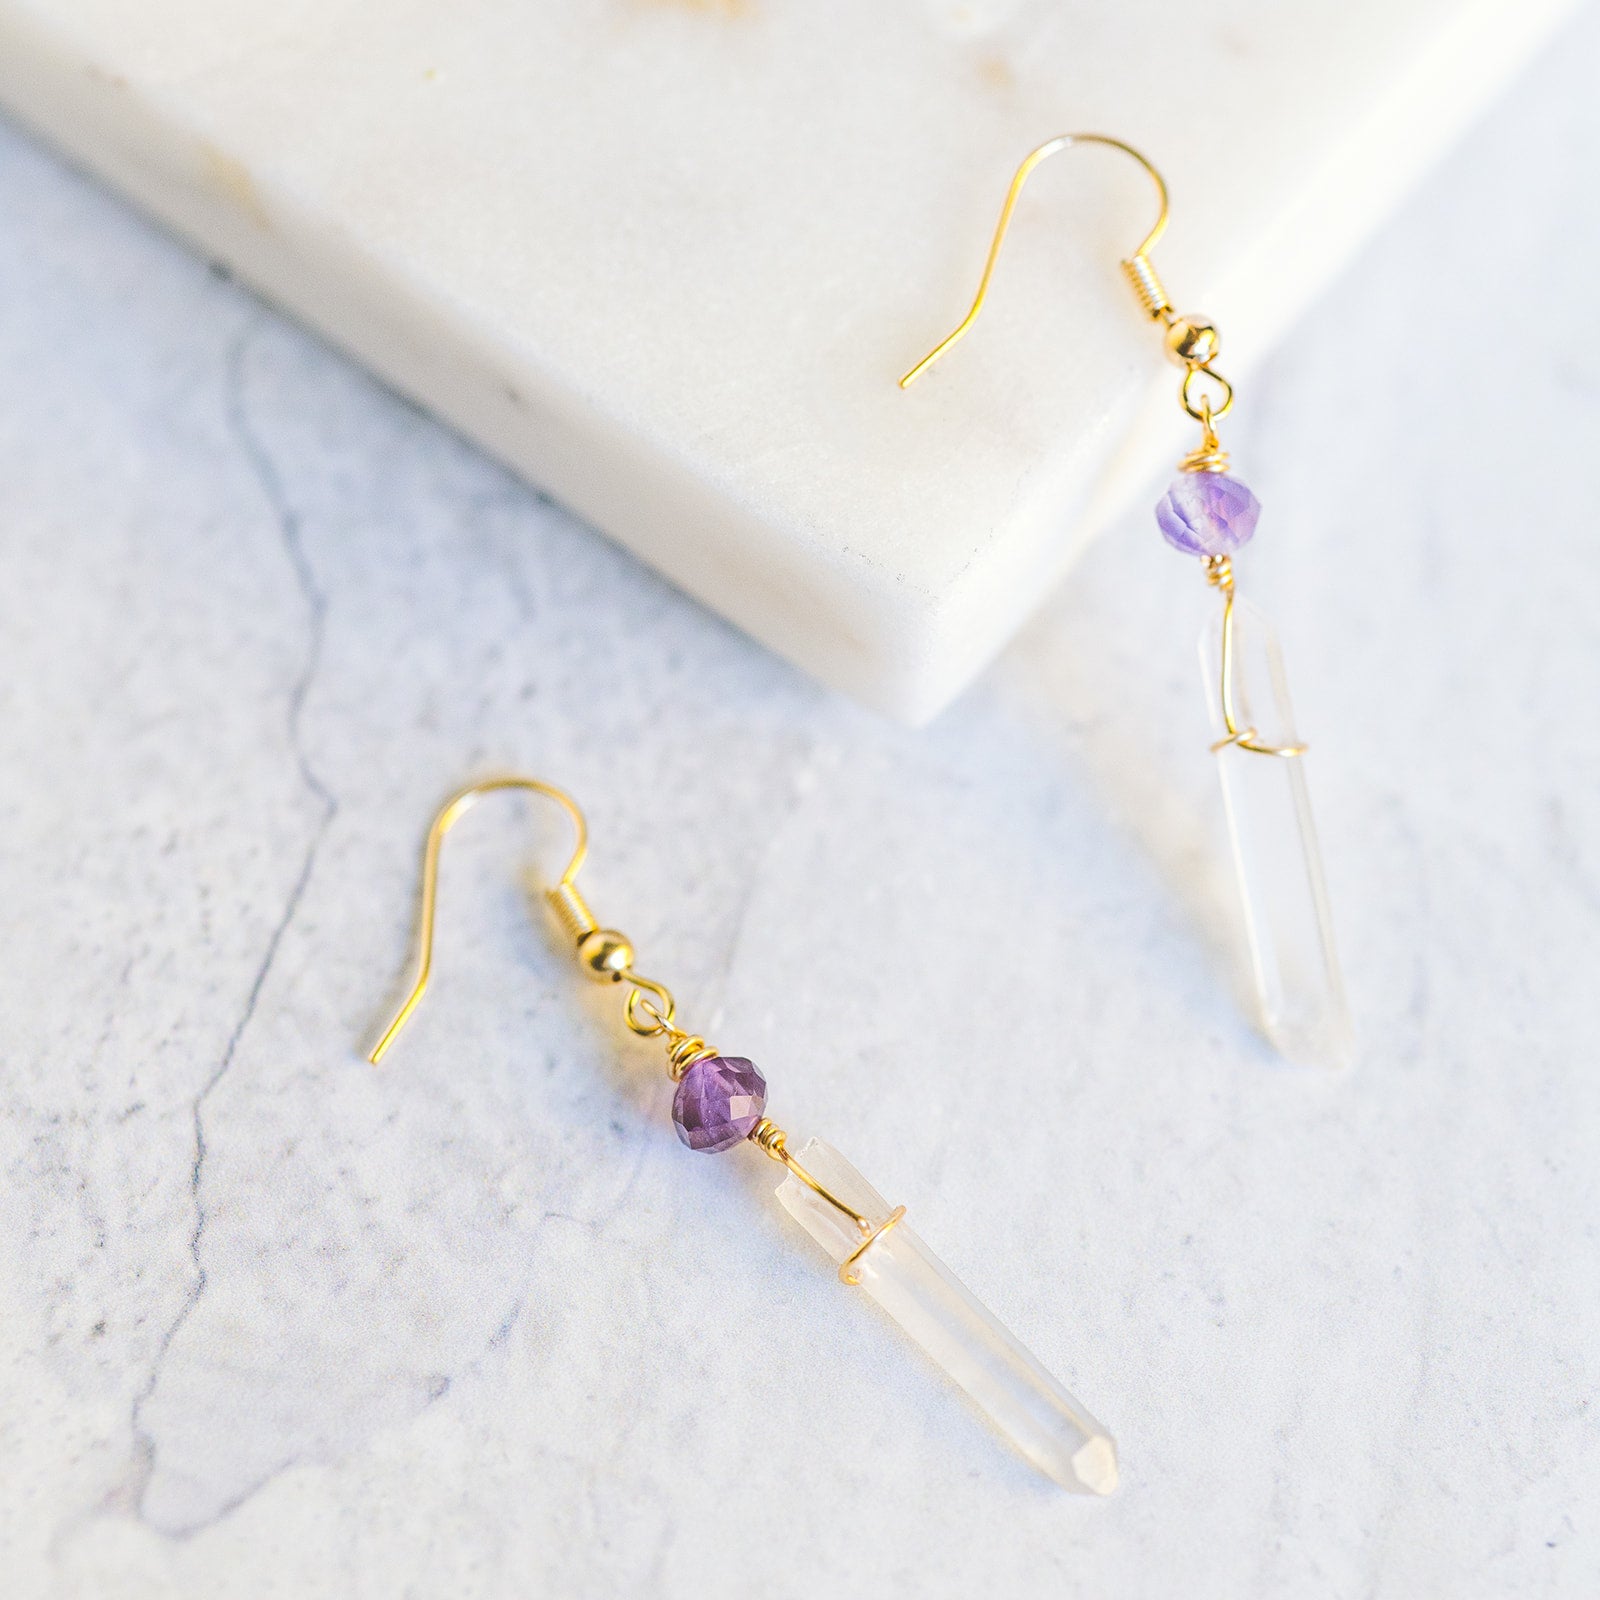 Wire Wrapped Crystal Earrings - Clear Quartz and Amethyst